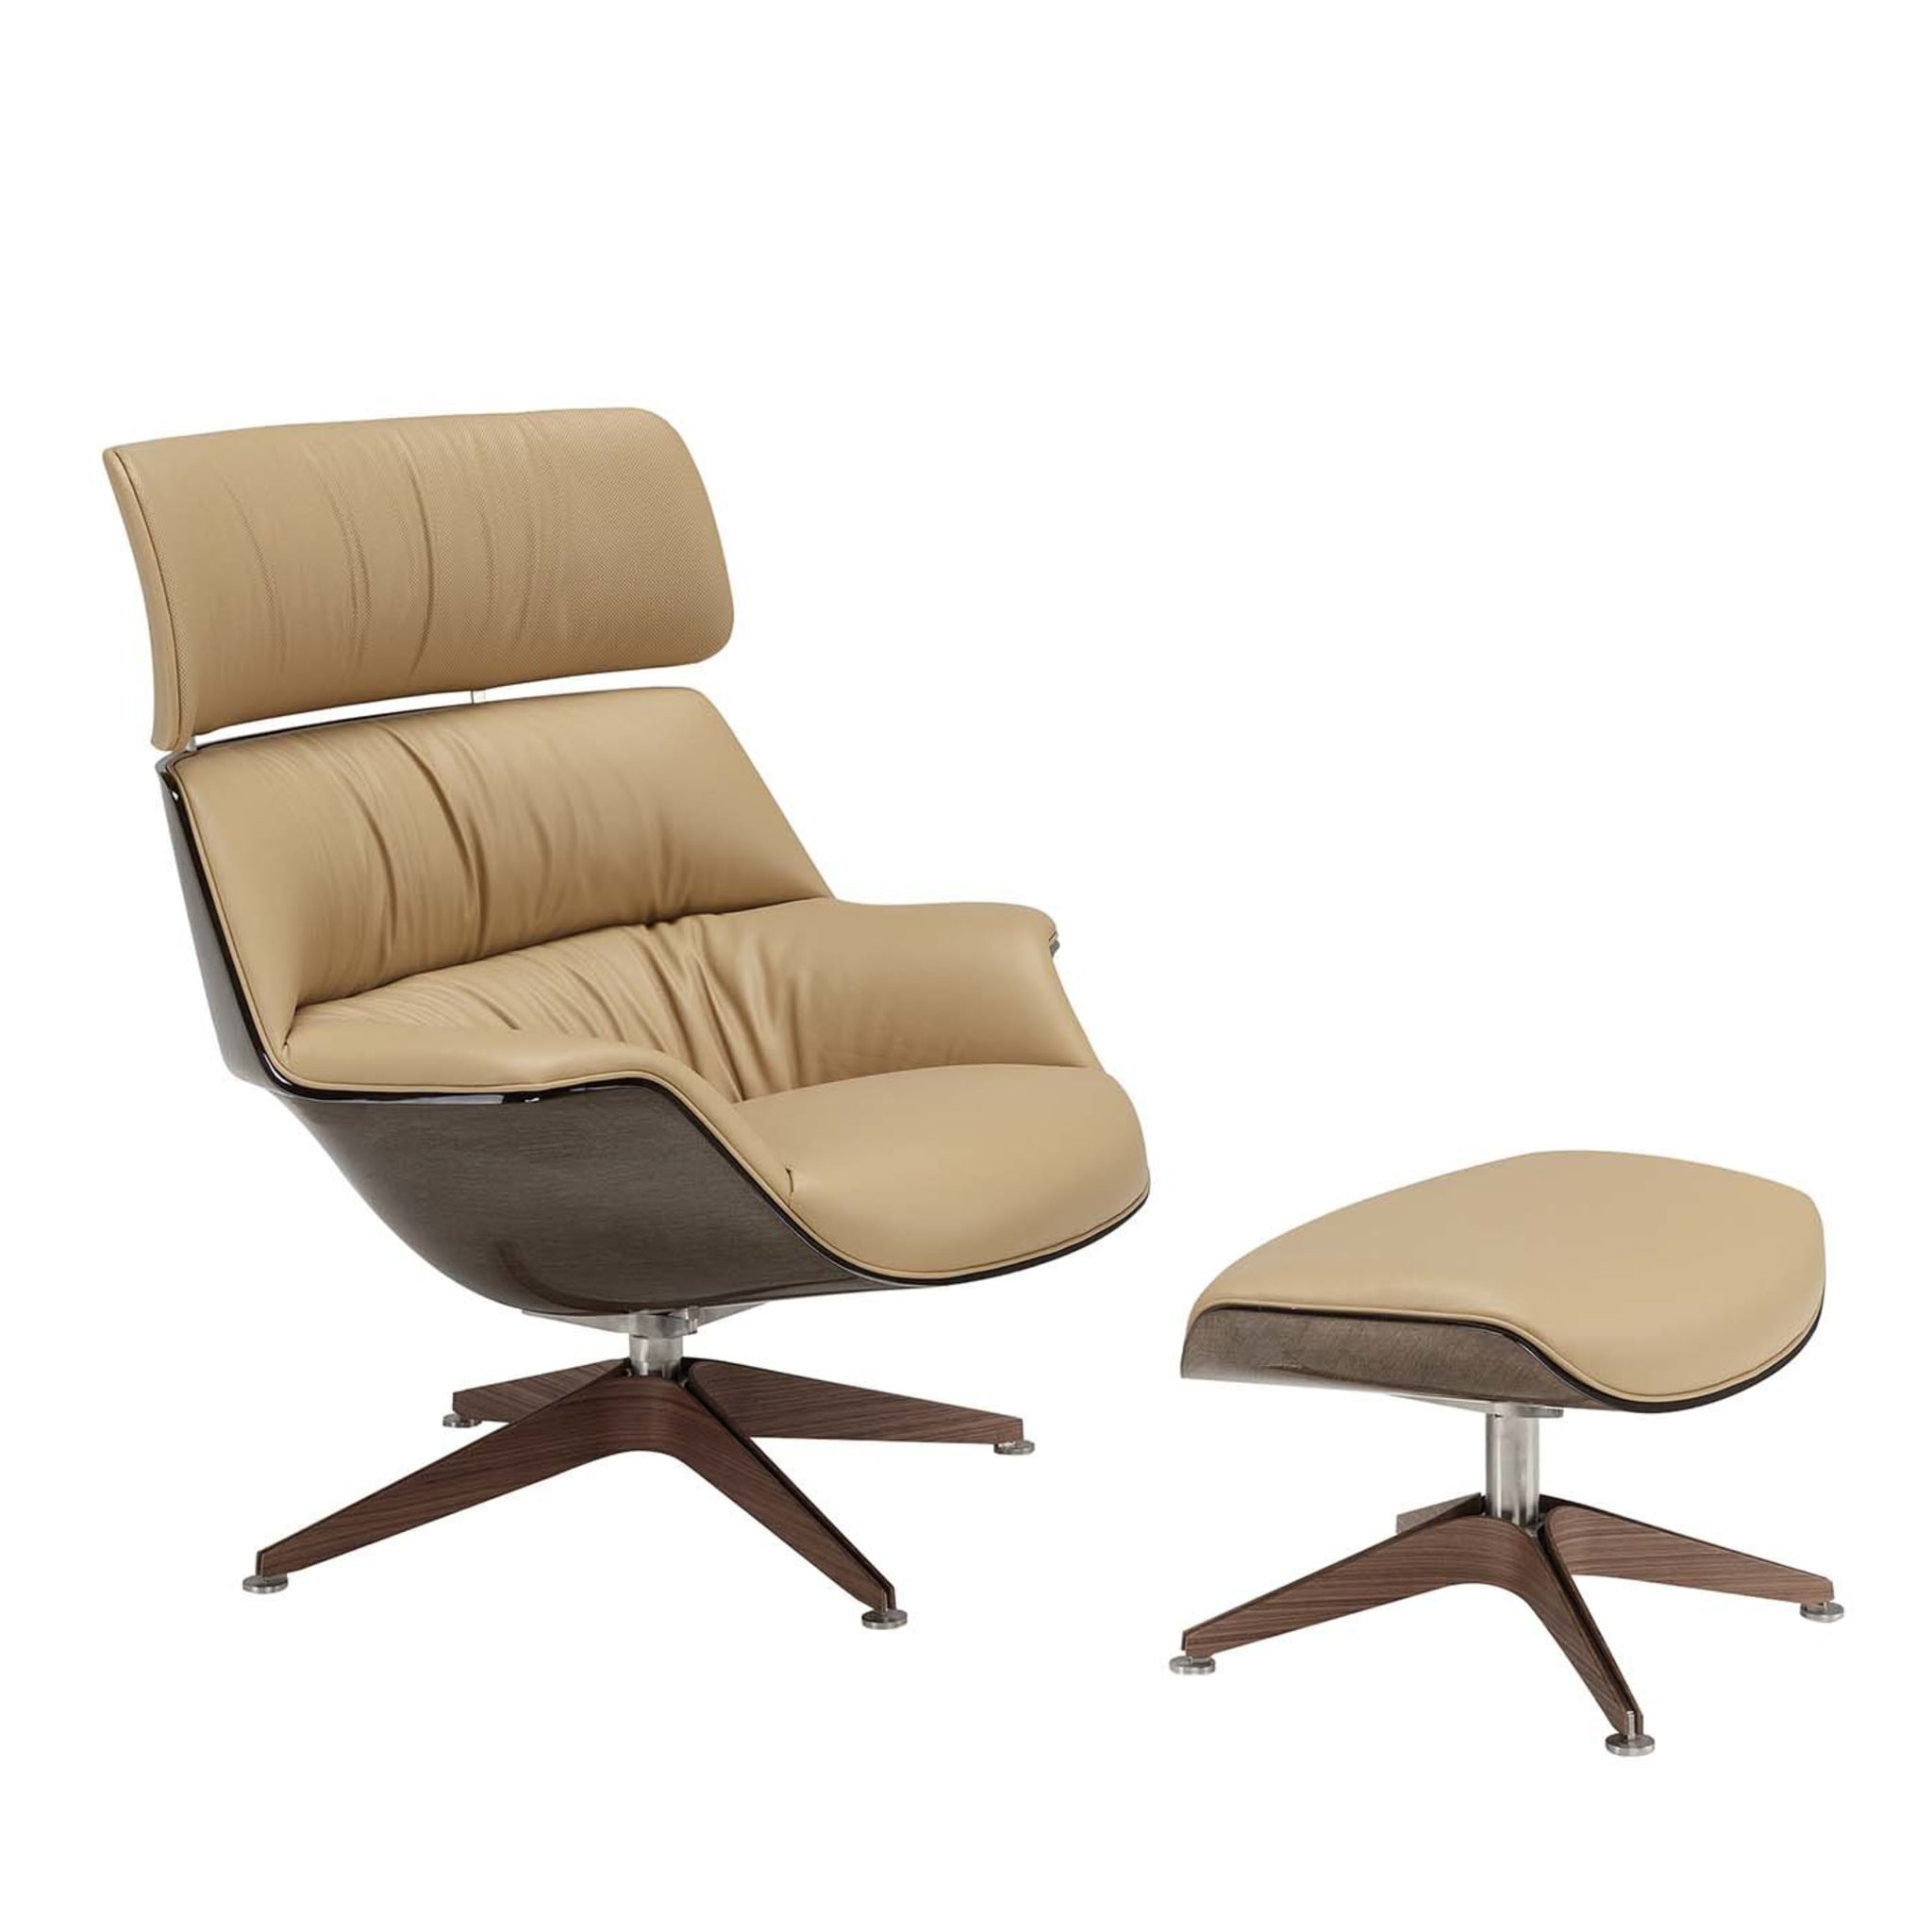 Saintluc Coach Lounge Chair and Pouf by Jean-Marie Massaud - Main view